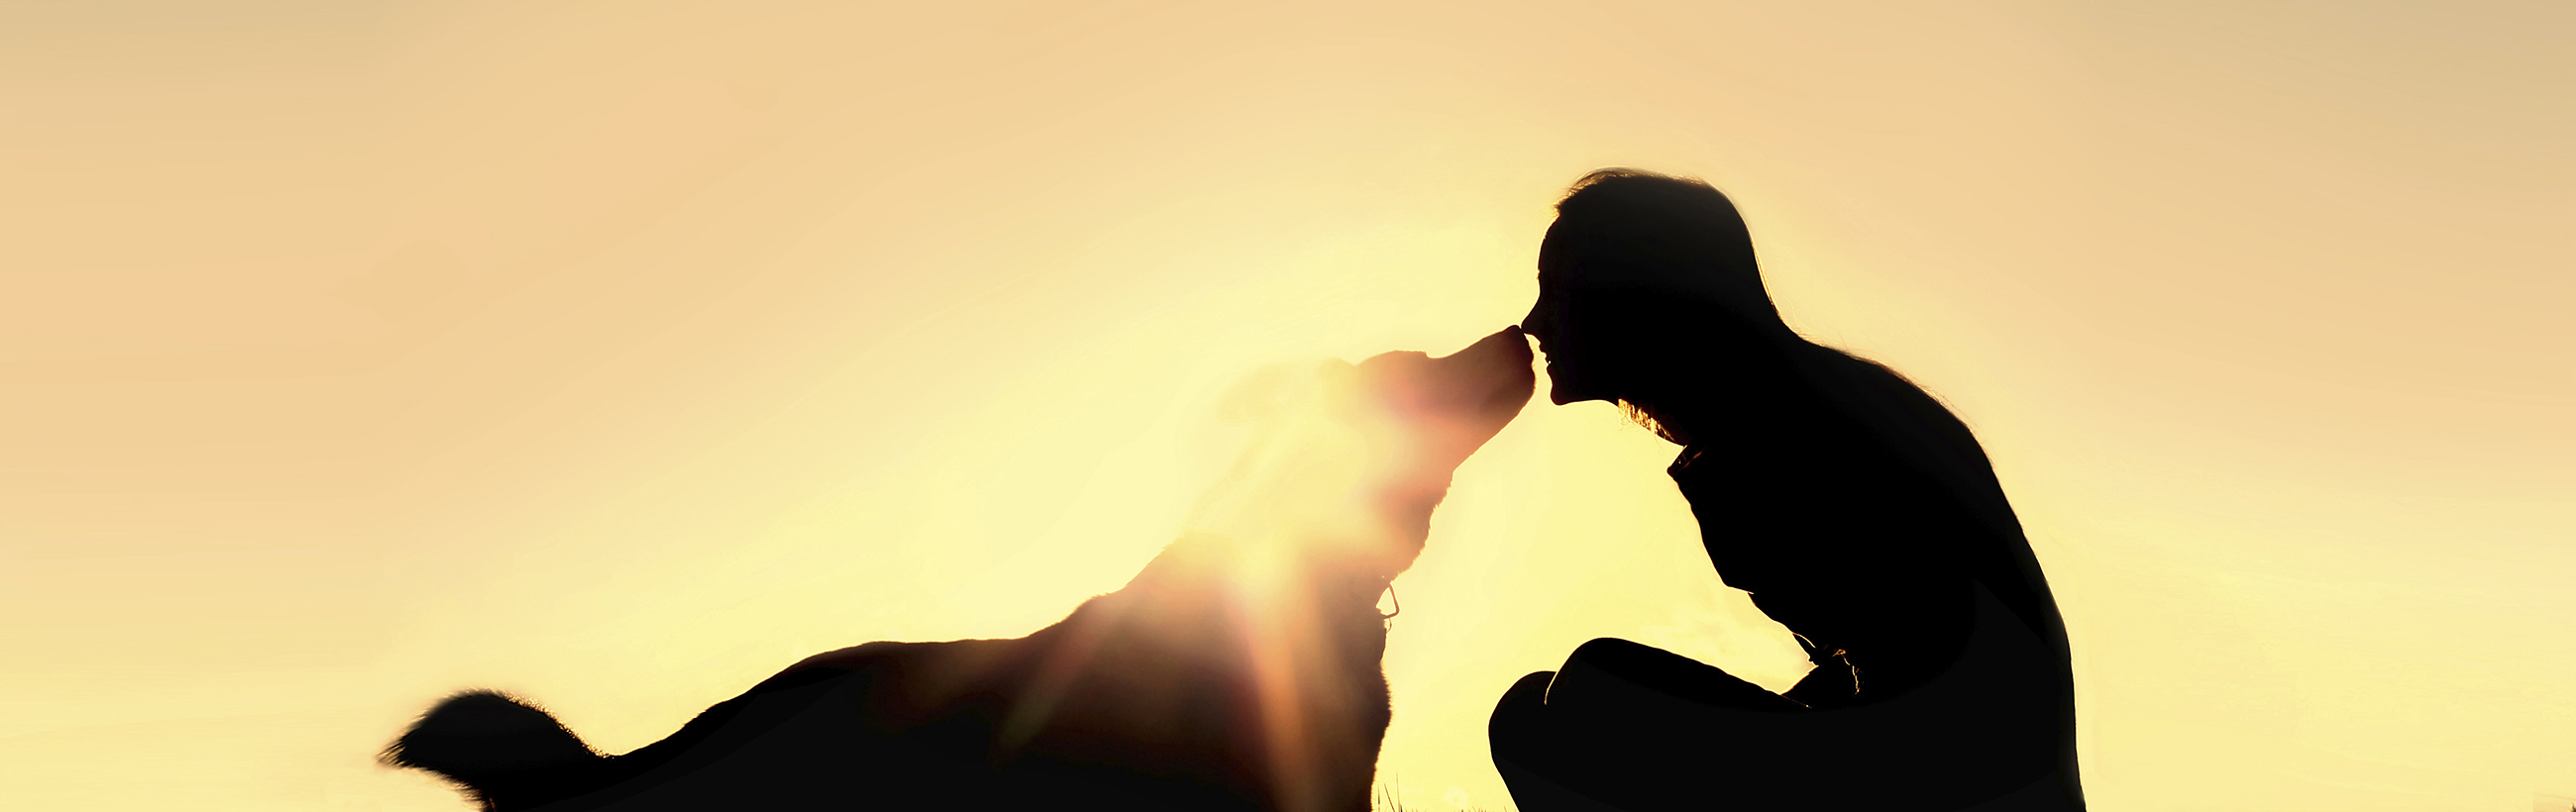 Silhouette of woman with dog